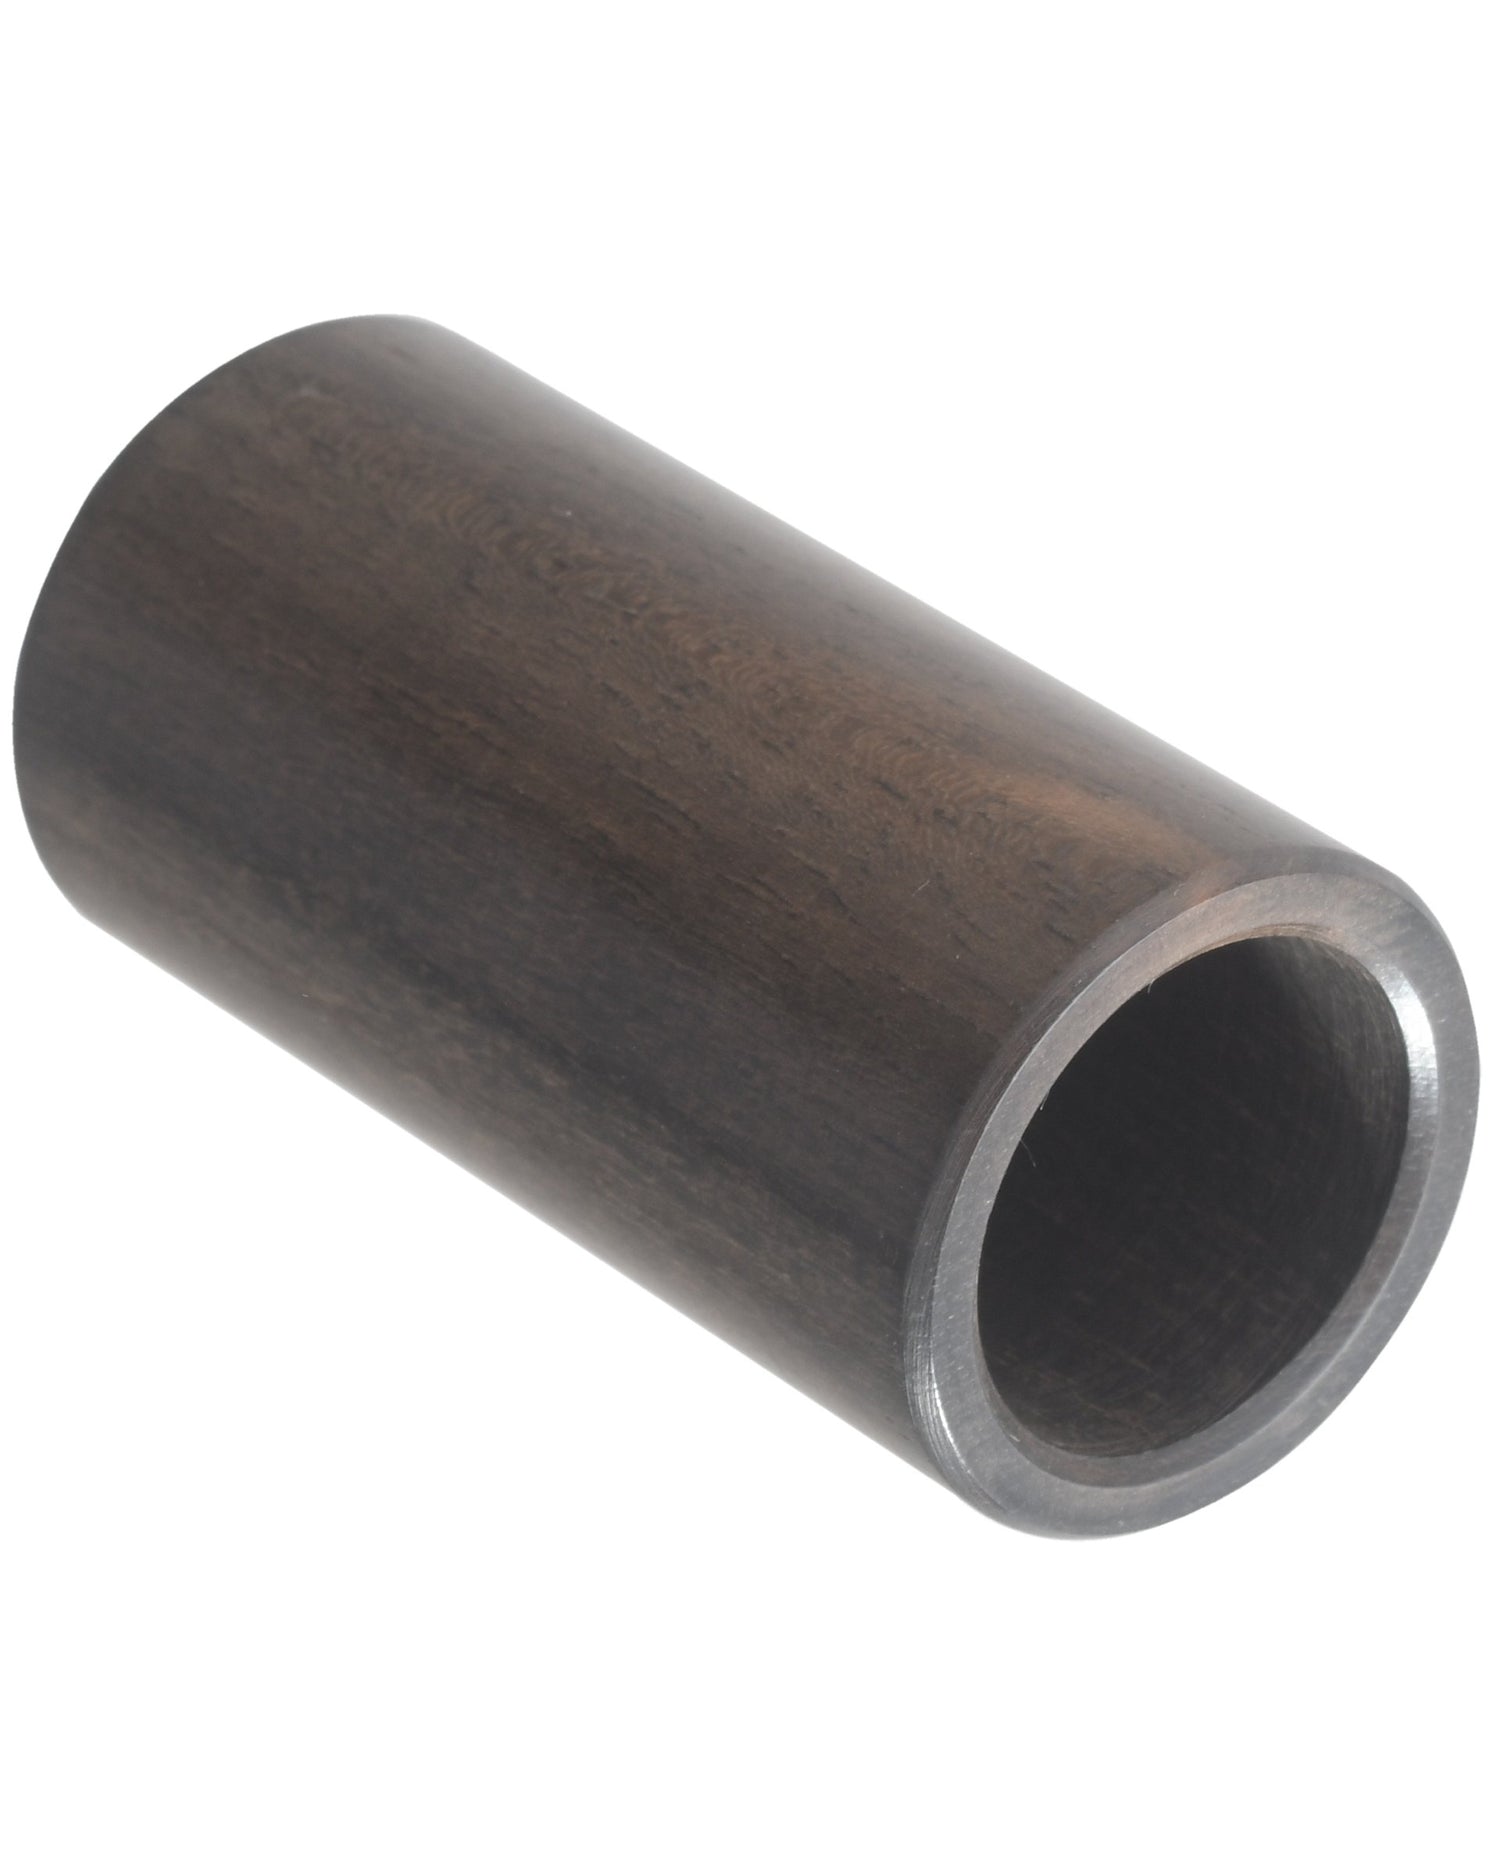 Image 1 of Taylor Ebony Guitar Slide, Small - SKU# TEGS-S : Product Type Accessories & Parts : Elderly Instruments